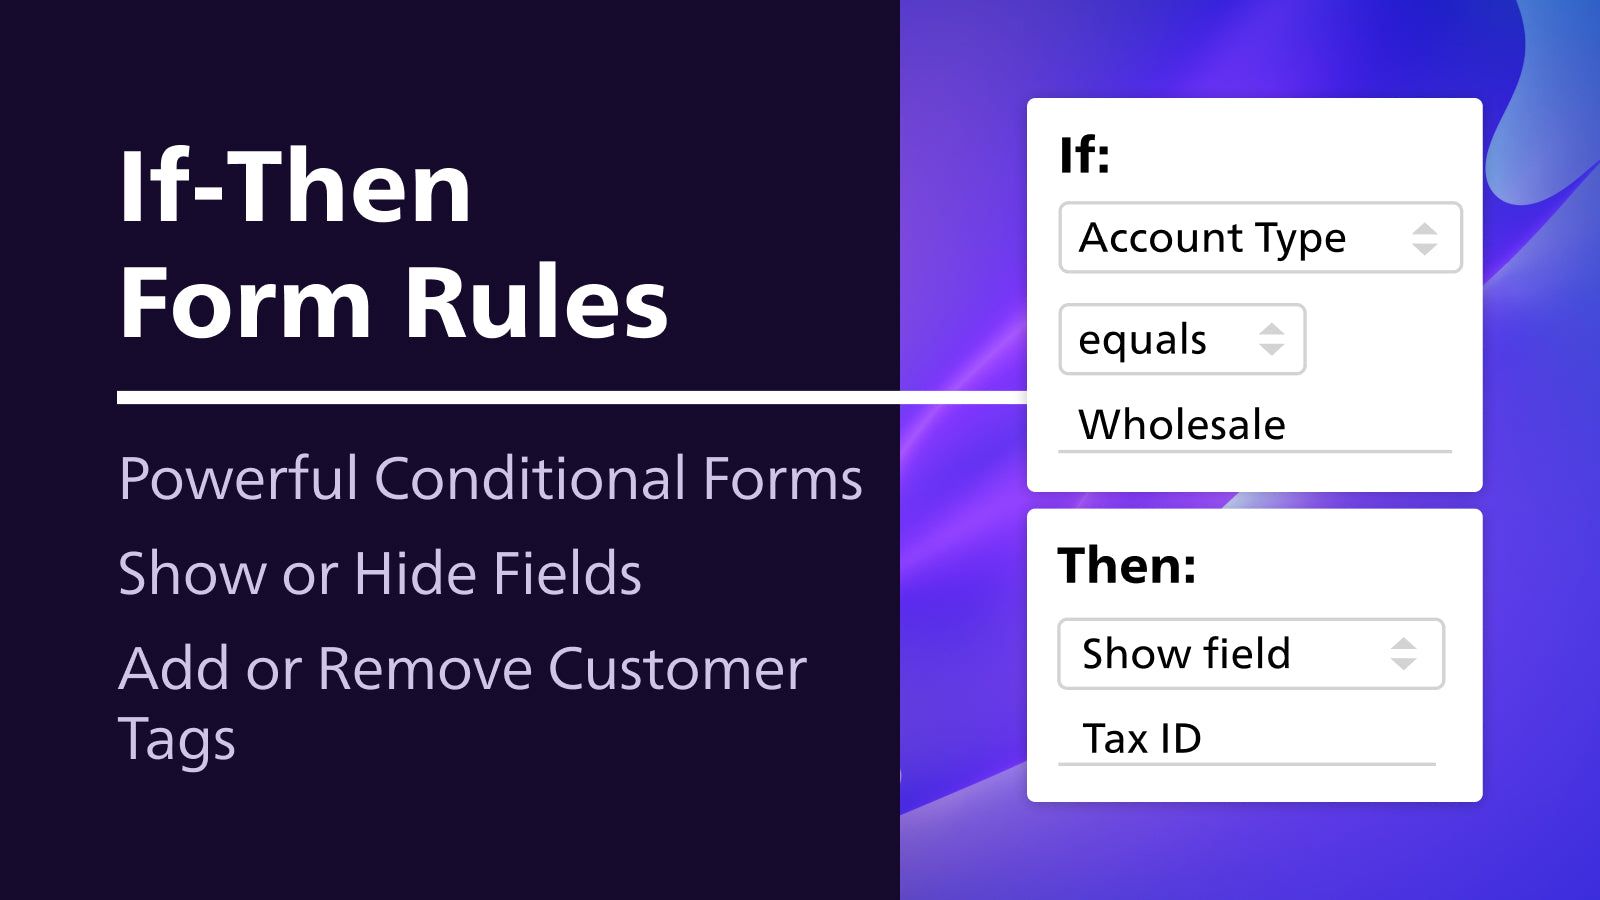 Conditional if-then rules allow for advanced form customization